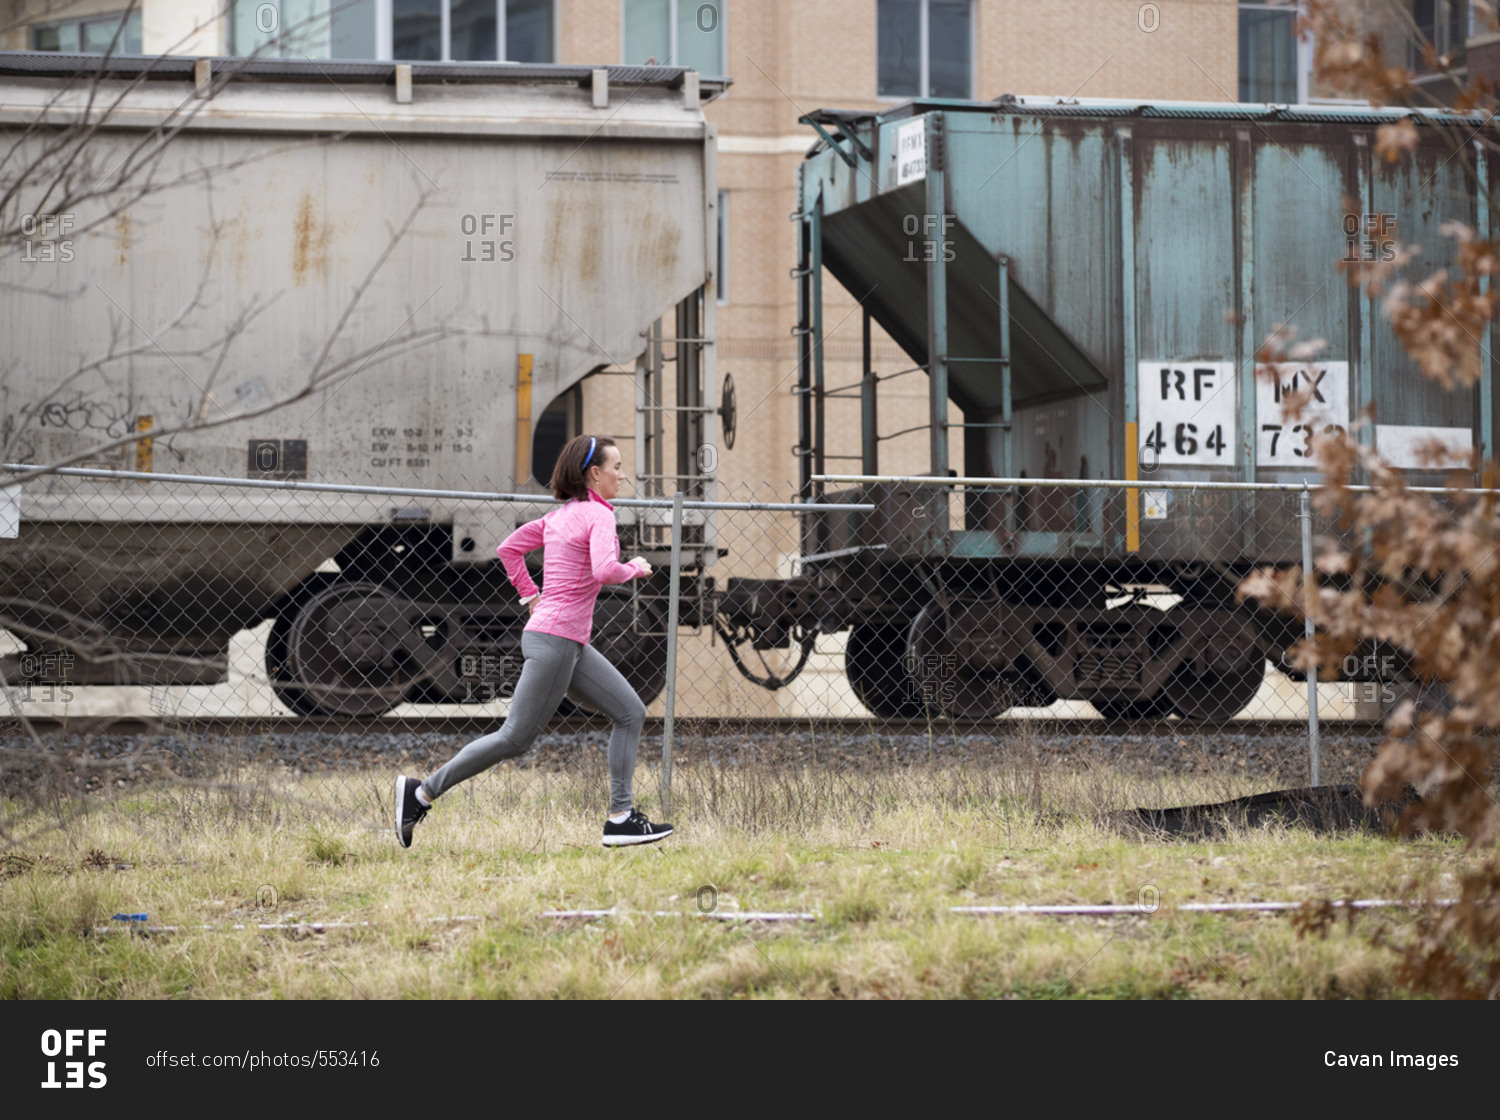 Side view of woman jogging on grassy field by freight train